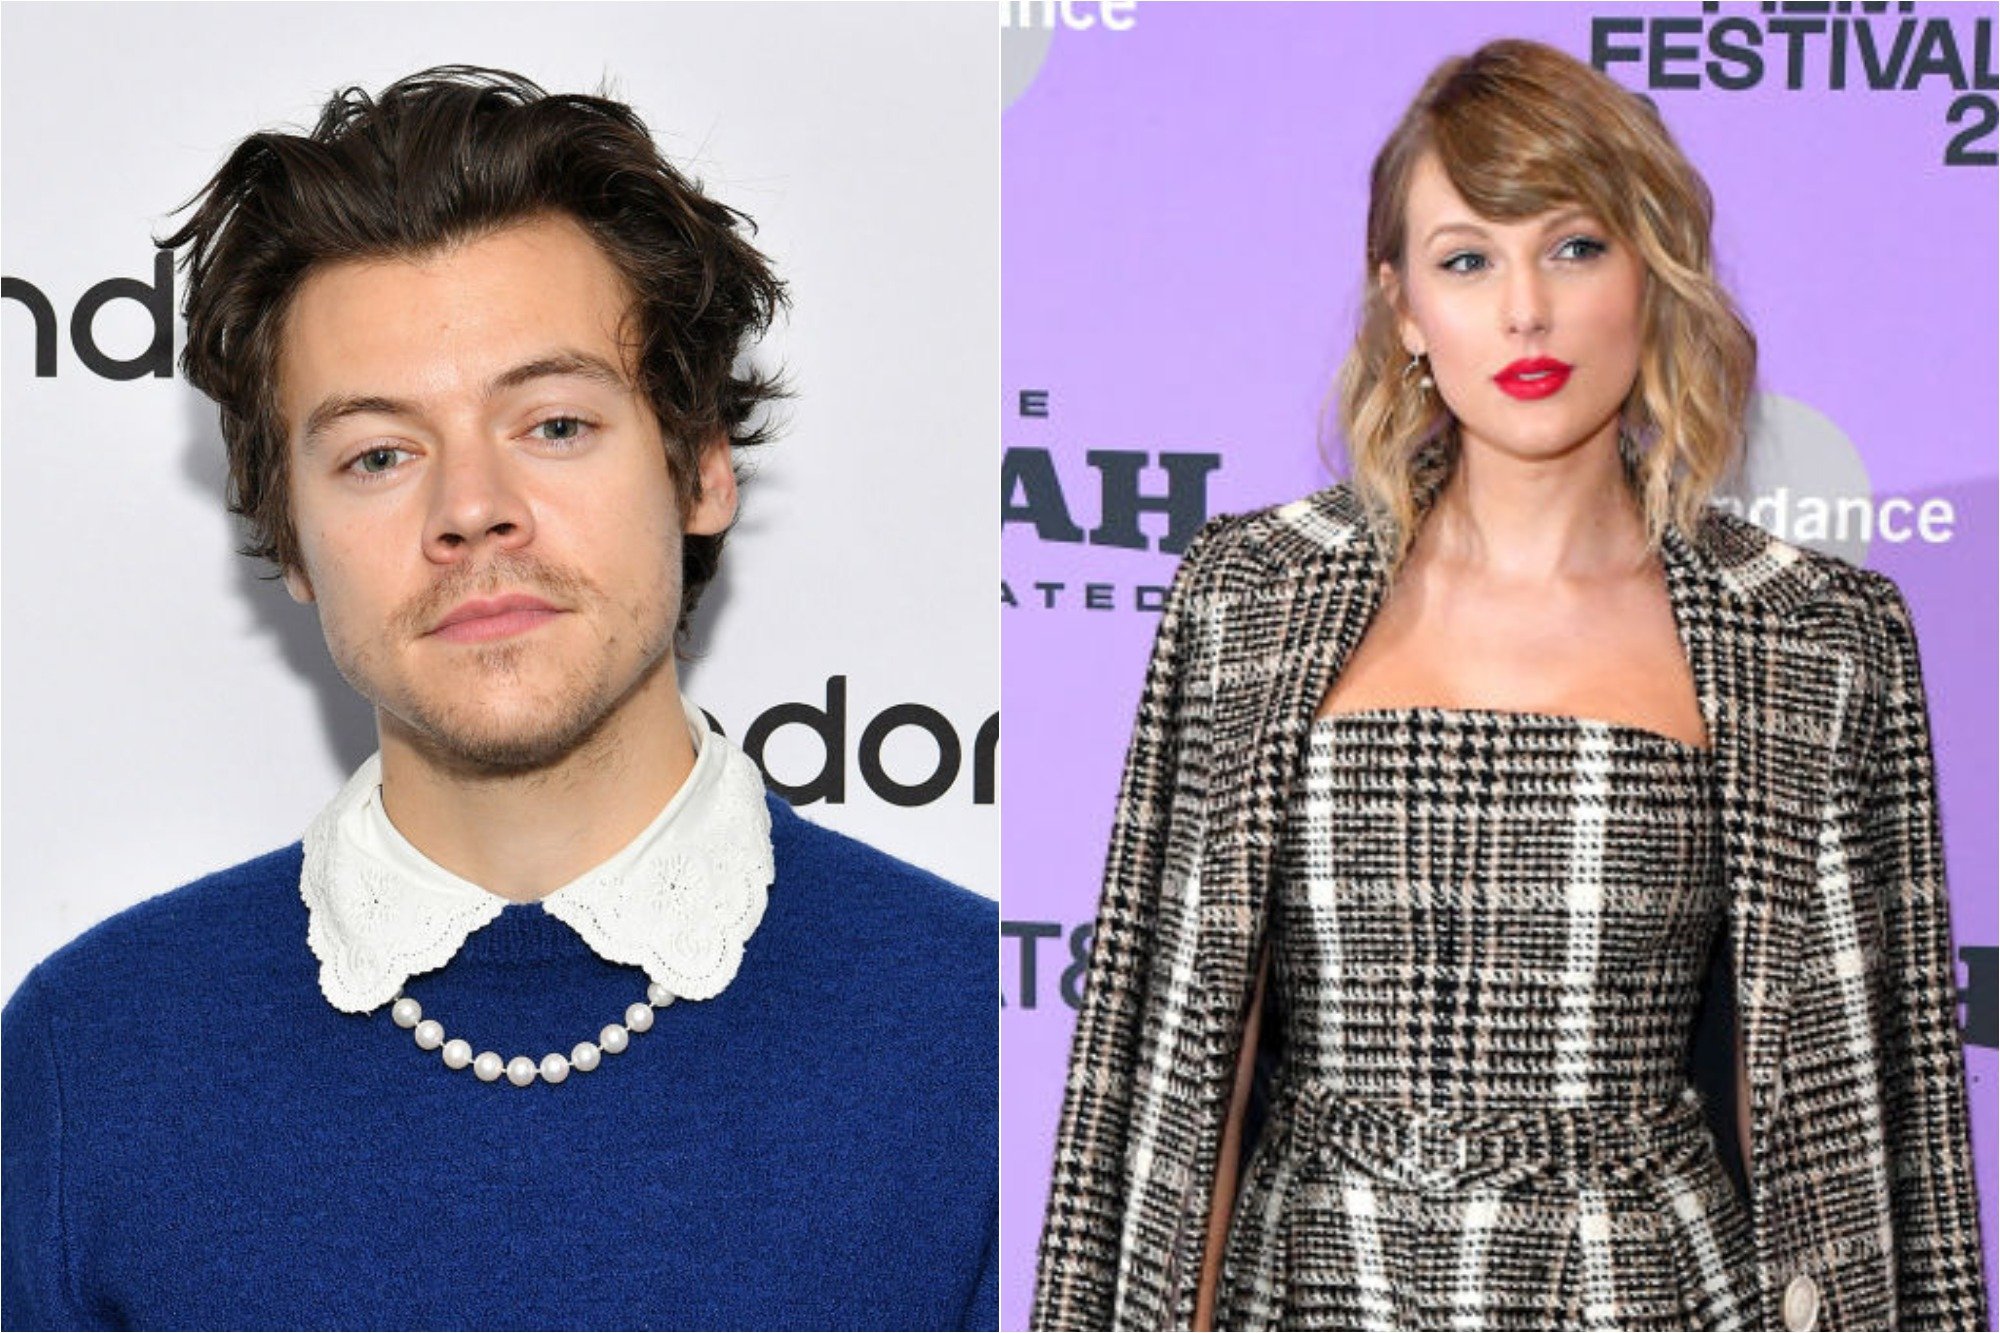 (L) Harry Styles at SiriusXM Studios on March 02, 2020 / (R) Taylor Swift at the Netflix premiere of 'Miss Americana' at Sundance Film Festival on January 23, 2020